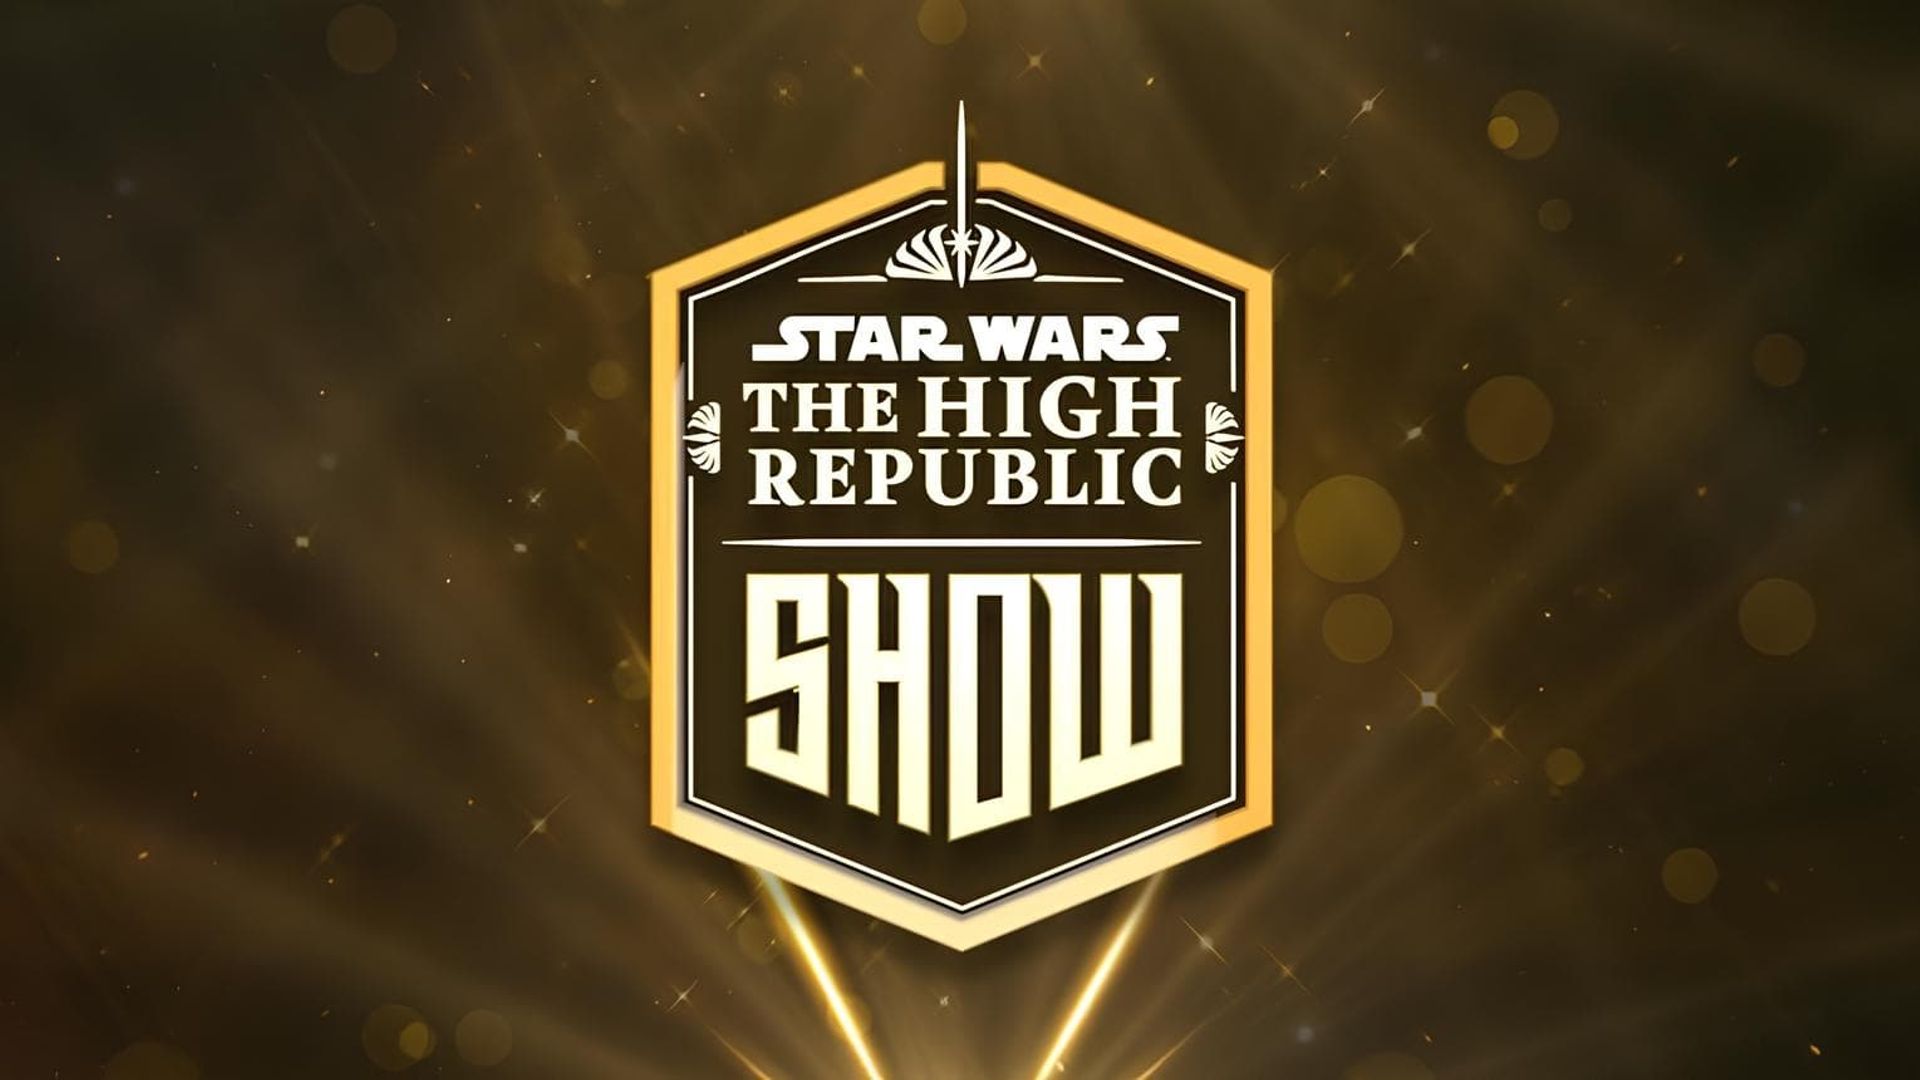 Star Wars: The High Republic Show background